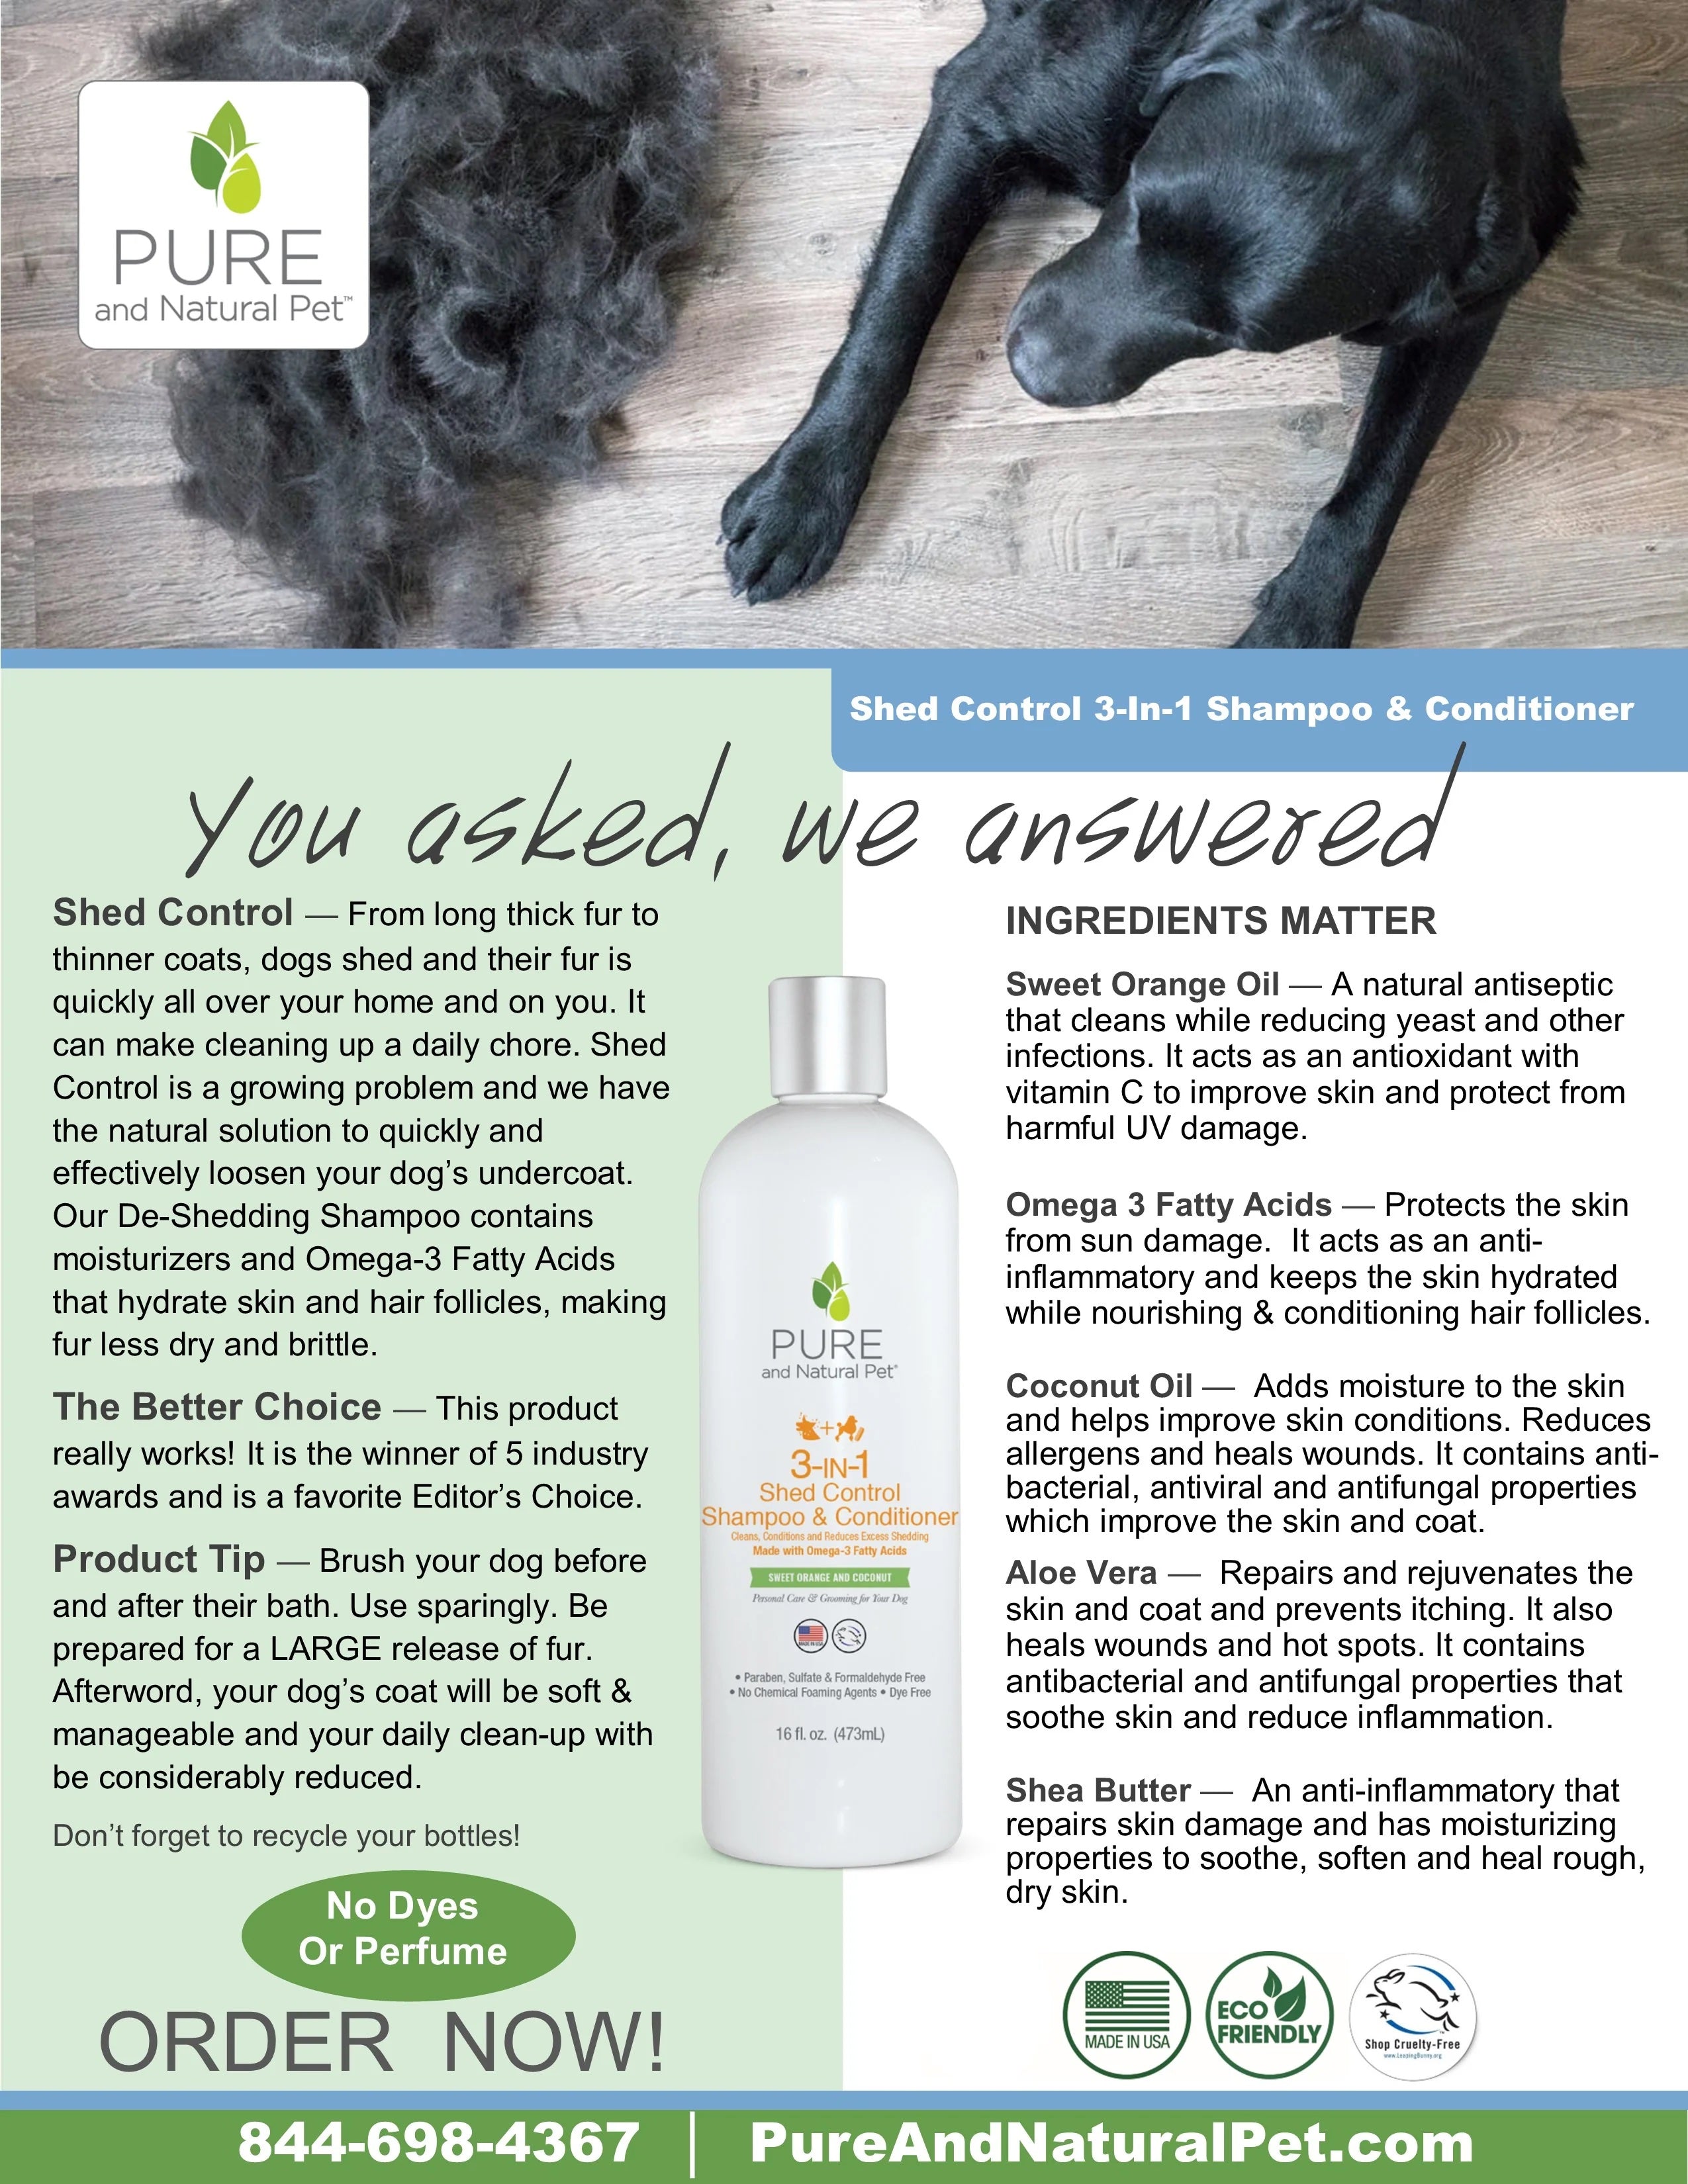 Pure and Natural Organic Dog Shampoo & Conditioner: 3-IN-1 Shed Control